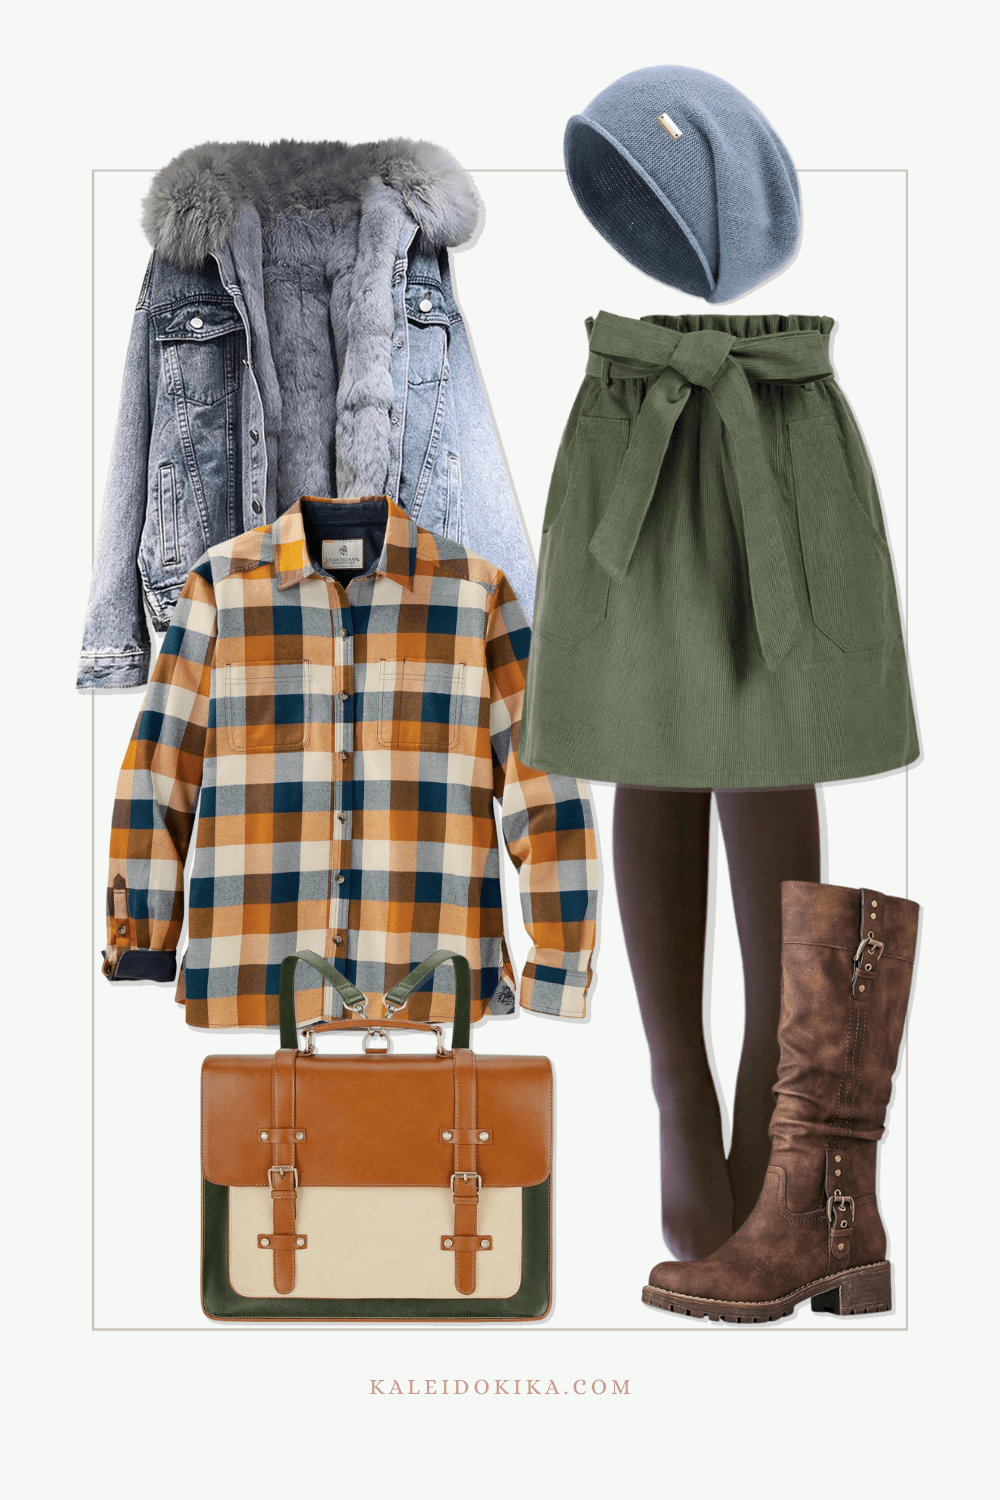 A winter outfit idea with these elements: Sherpa-lined denim jacket, flannel shirt, corduroy skirt, and knee-high boots with warm tighs, a cute slouchy beanie and a backpack.